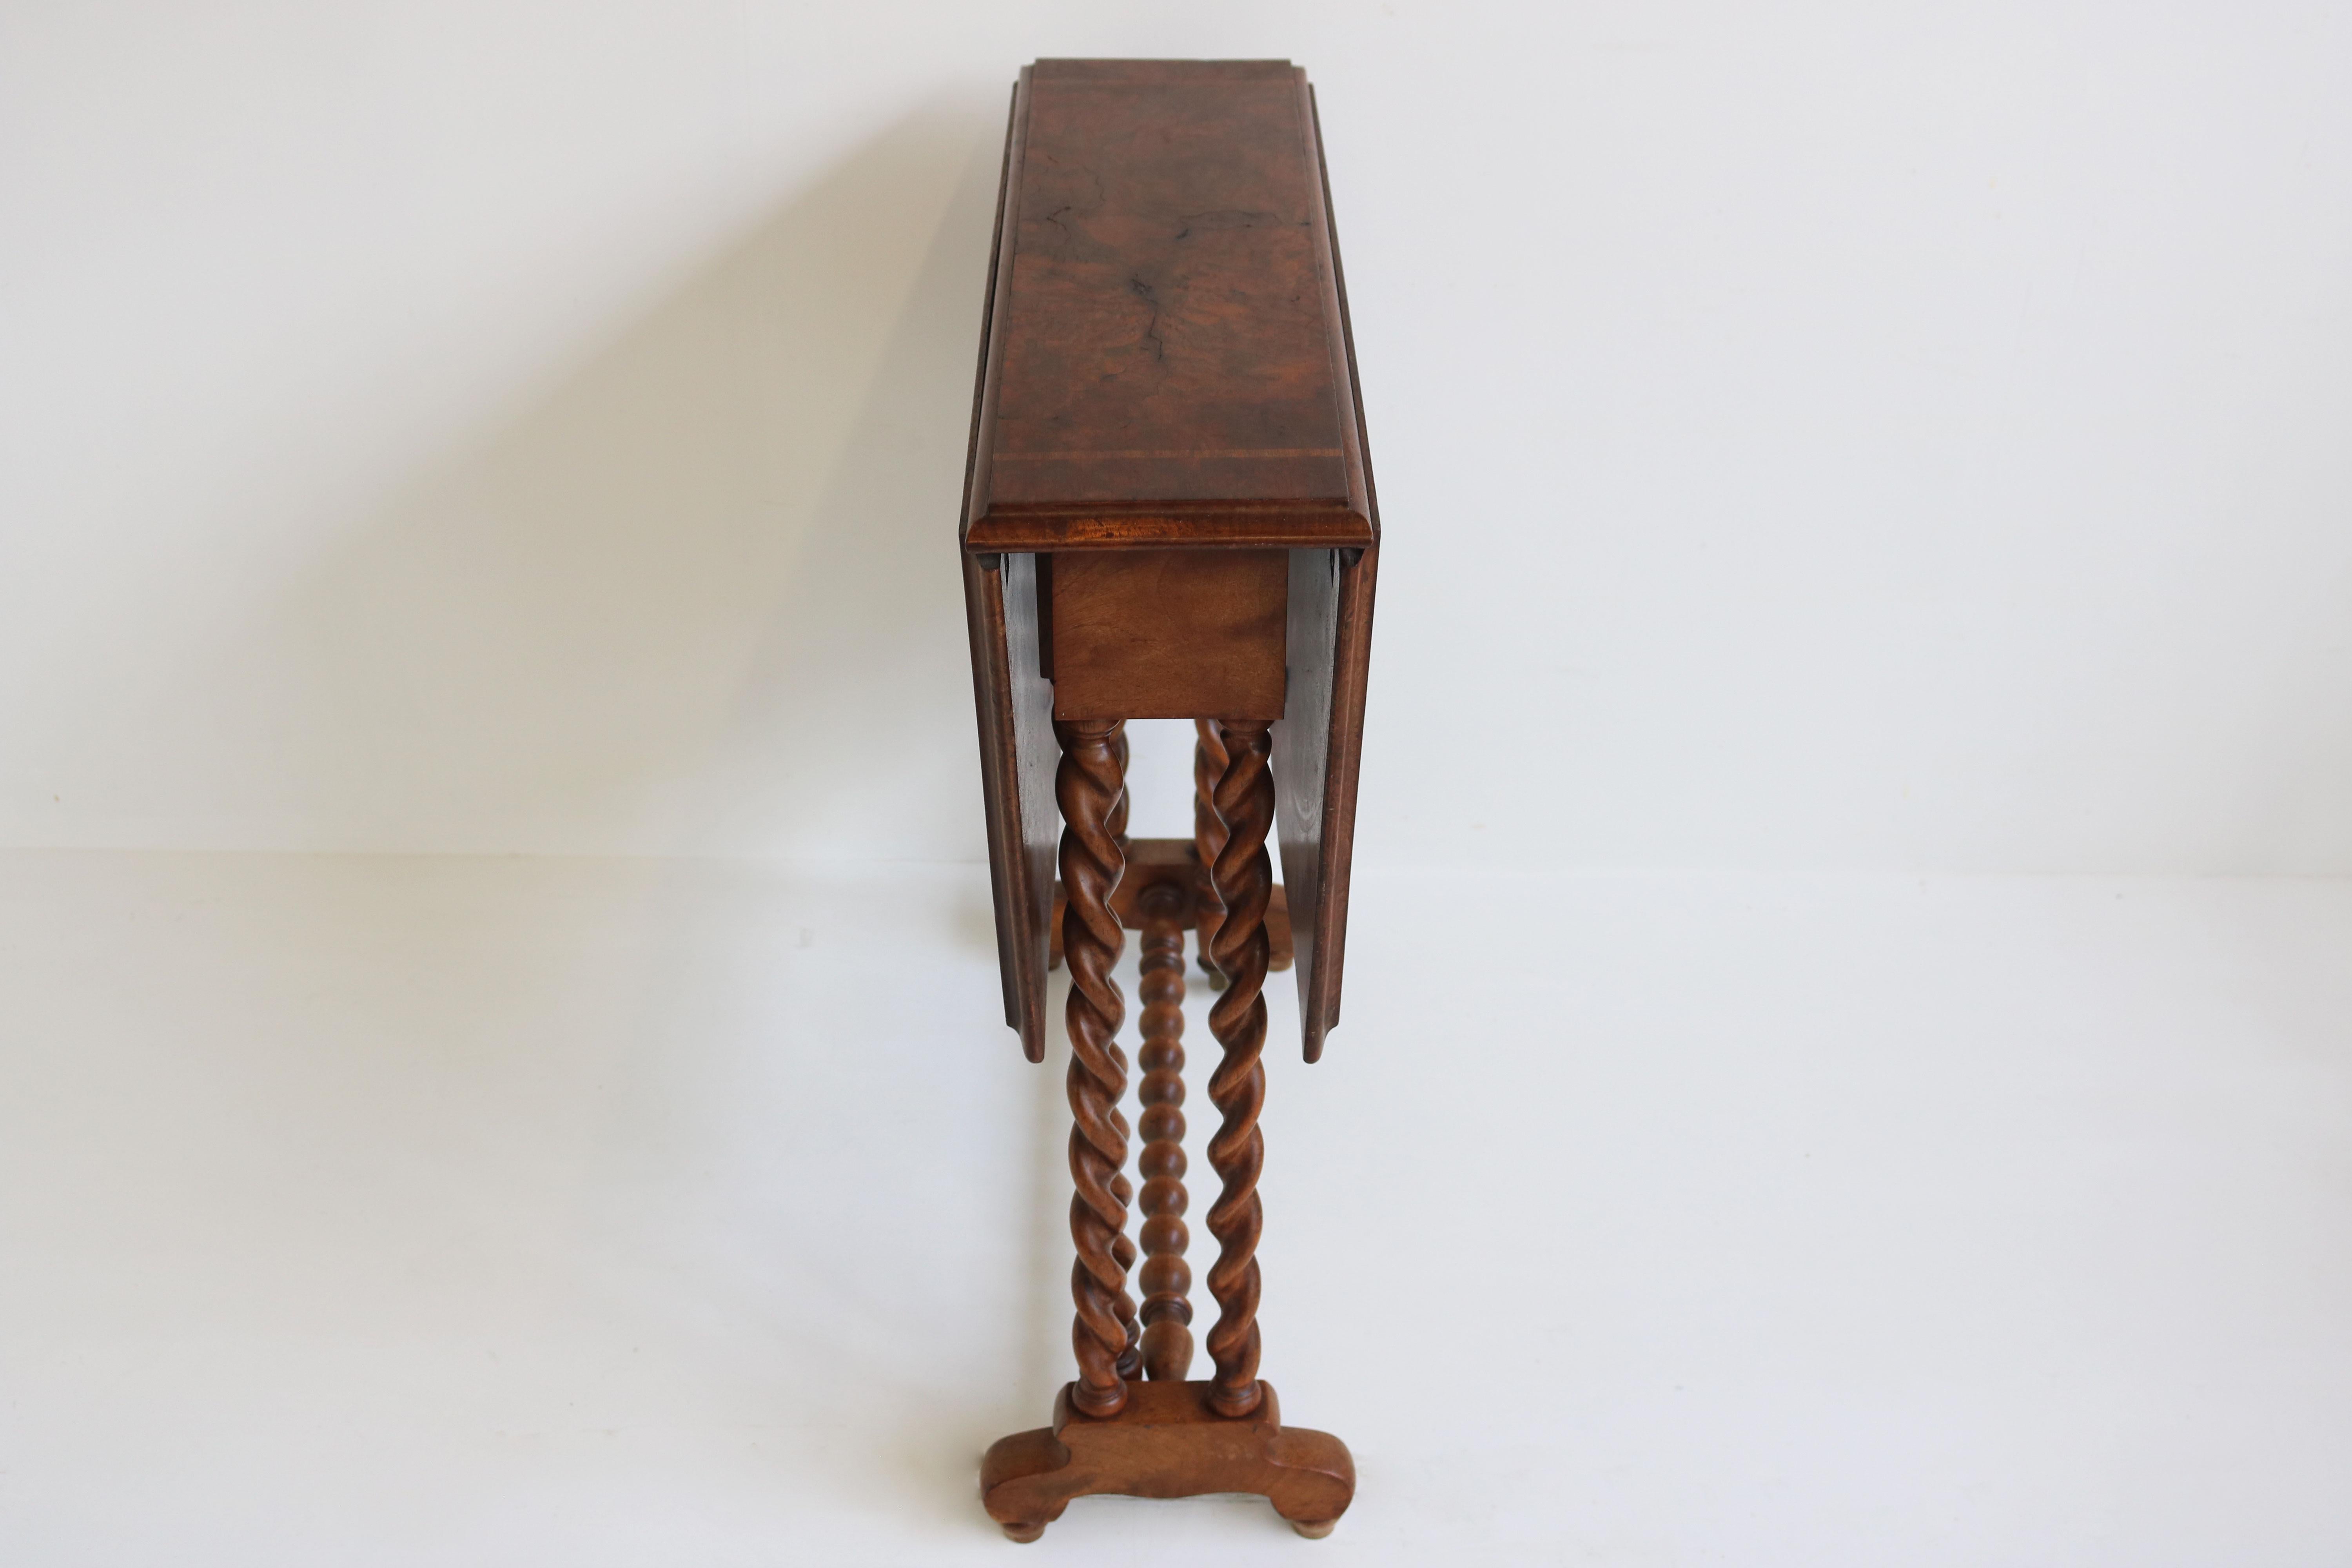 Antique English Barley Twist Foldable Table / Gate-Leg Table 19th Century Burl In Good Condition For Sale In Ijzendijke, NL